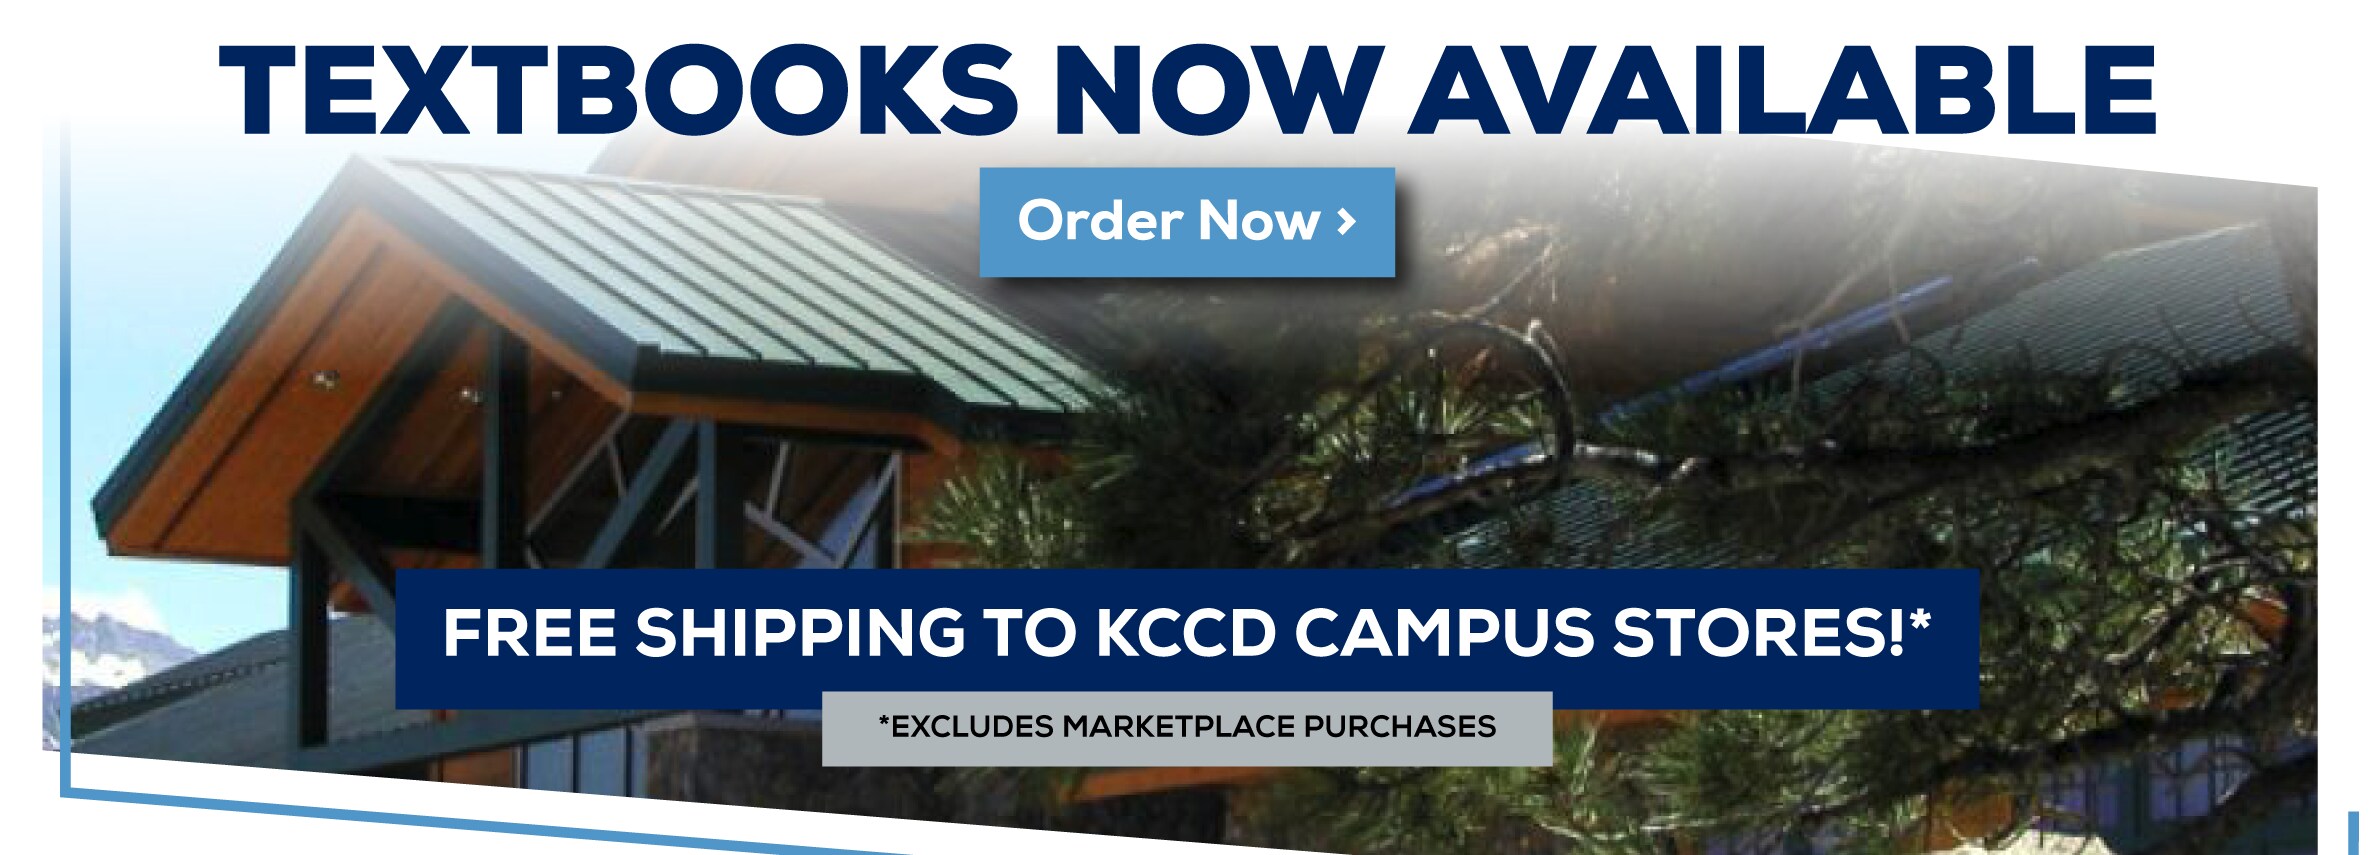 Textbooks Now Available. Order Now. Free Shipping to KCCD Campus Stores. Excludes Marketplace Purchases.